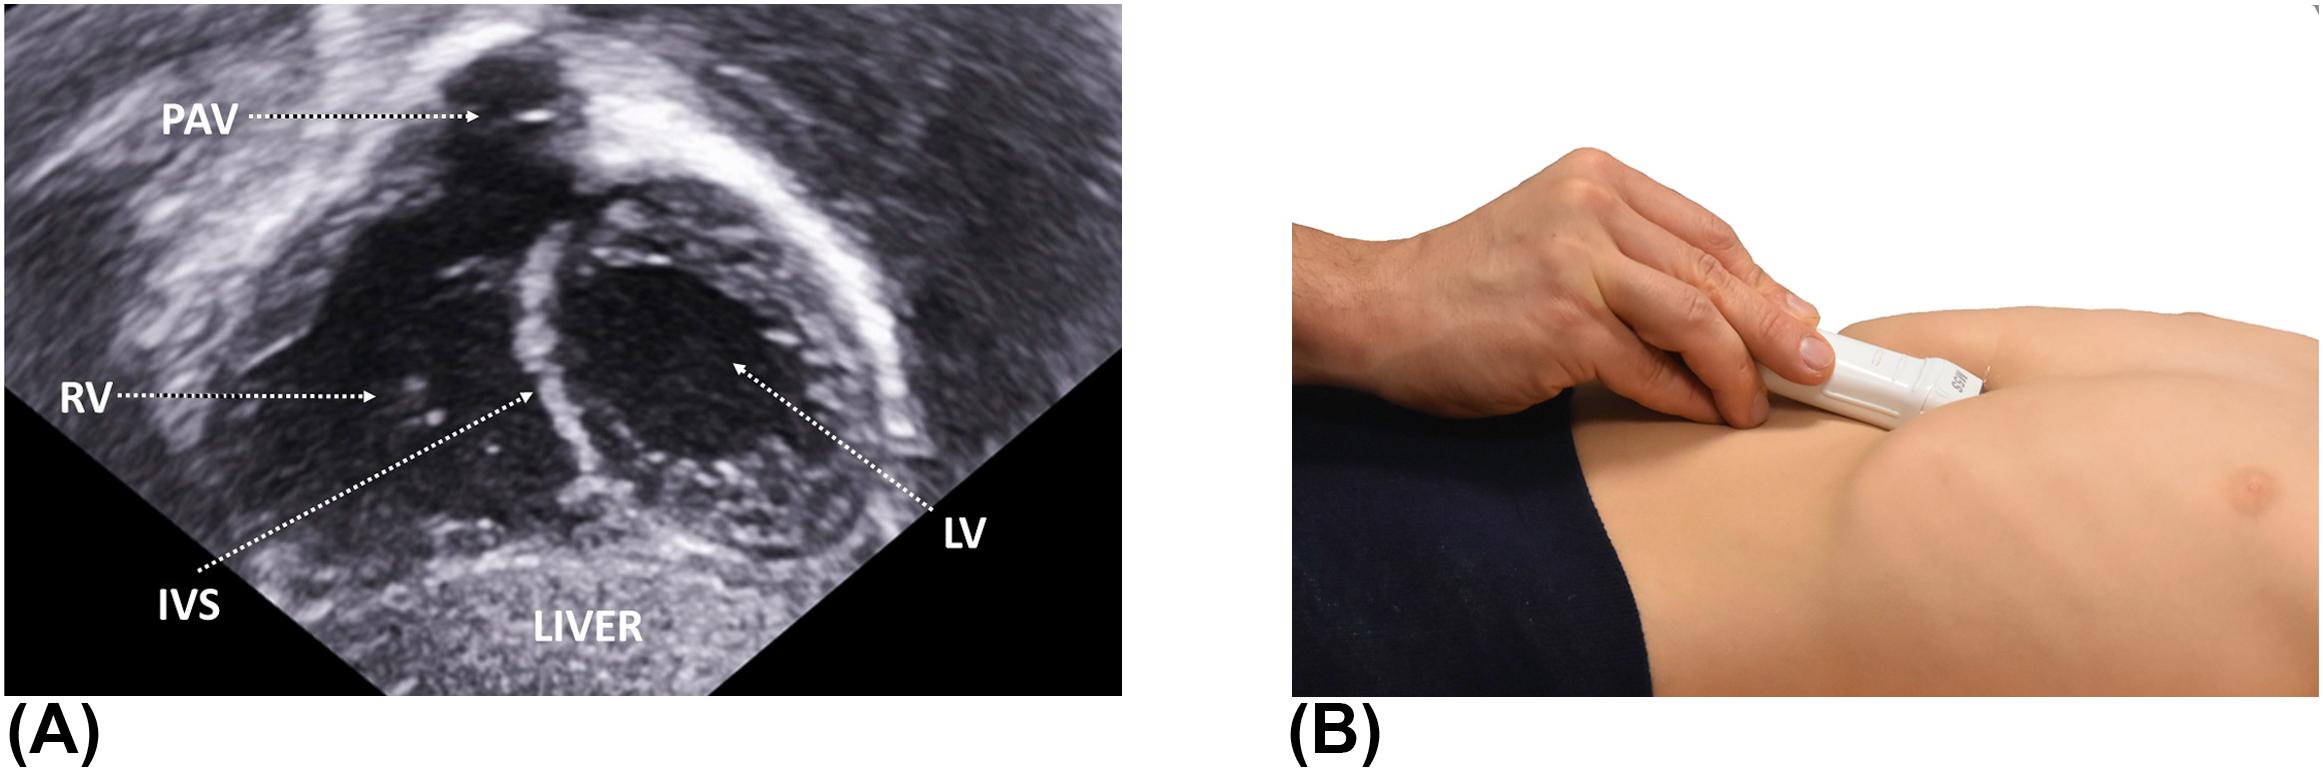 Figure 7, (A) Subcostal long-axis view showing both ventricles and the right ventricular outflow tract. (B) This view is obtained by a maximal inferior angulation of the probe. The marker is at the 3 o'clock position. alPM , anterolateral papillary muscle; IVS , interventricular septum; LV , left ventricle; PA , pulmonary artery; PAV , pulmonary valve; pmPM , posteromedial papillary muscle; RV , right ventricle.